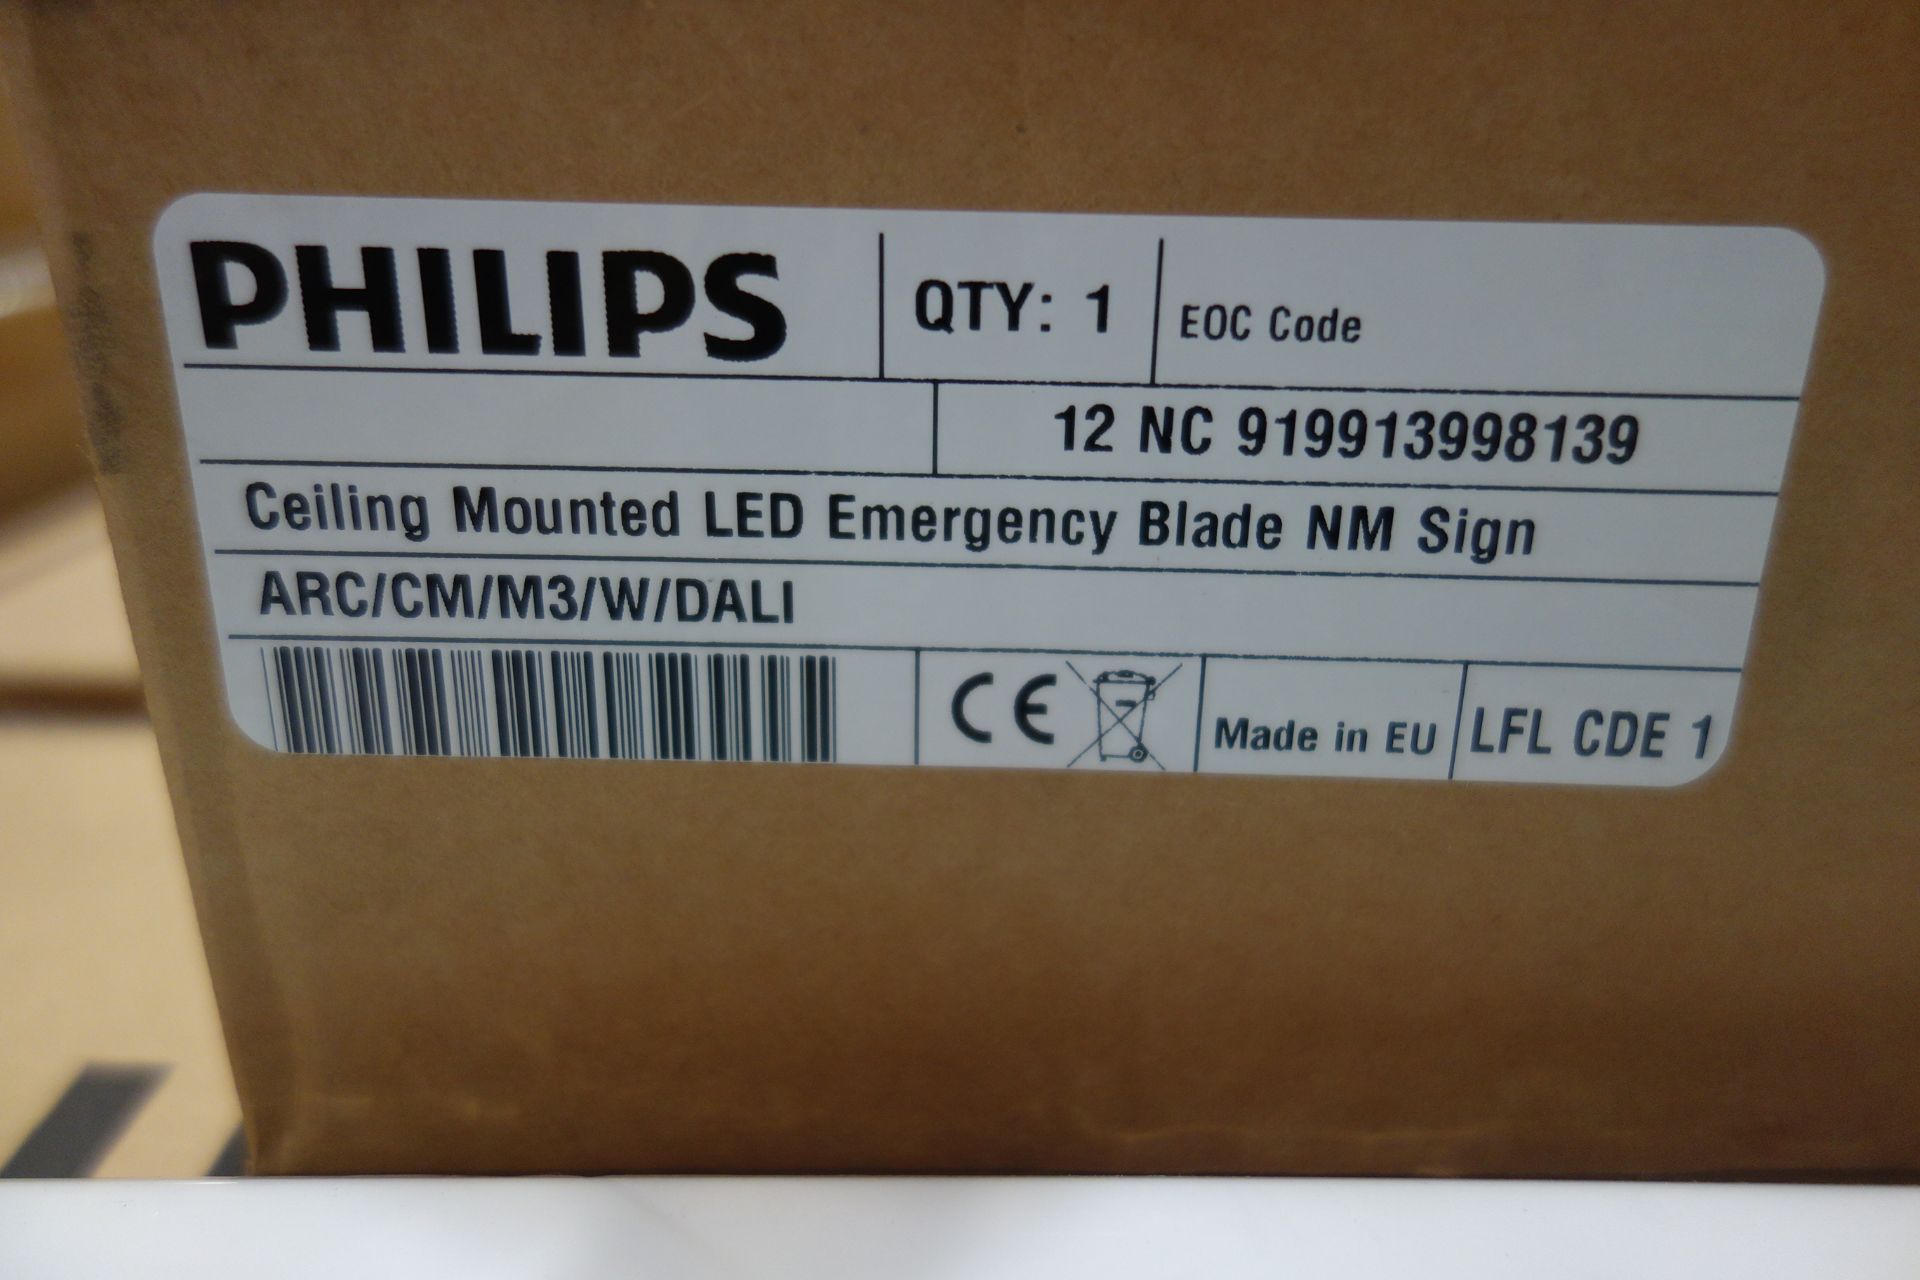 10 X Philips 12NC 9199 LED Ceiling Mounted Emergency Blade NM Sign